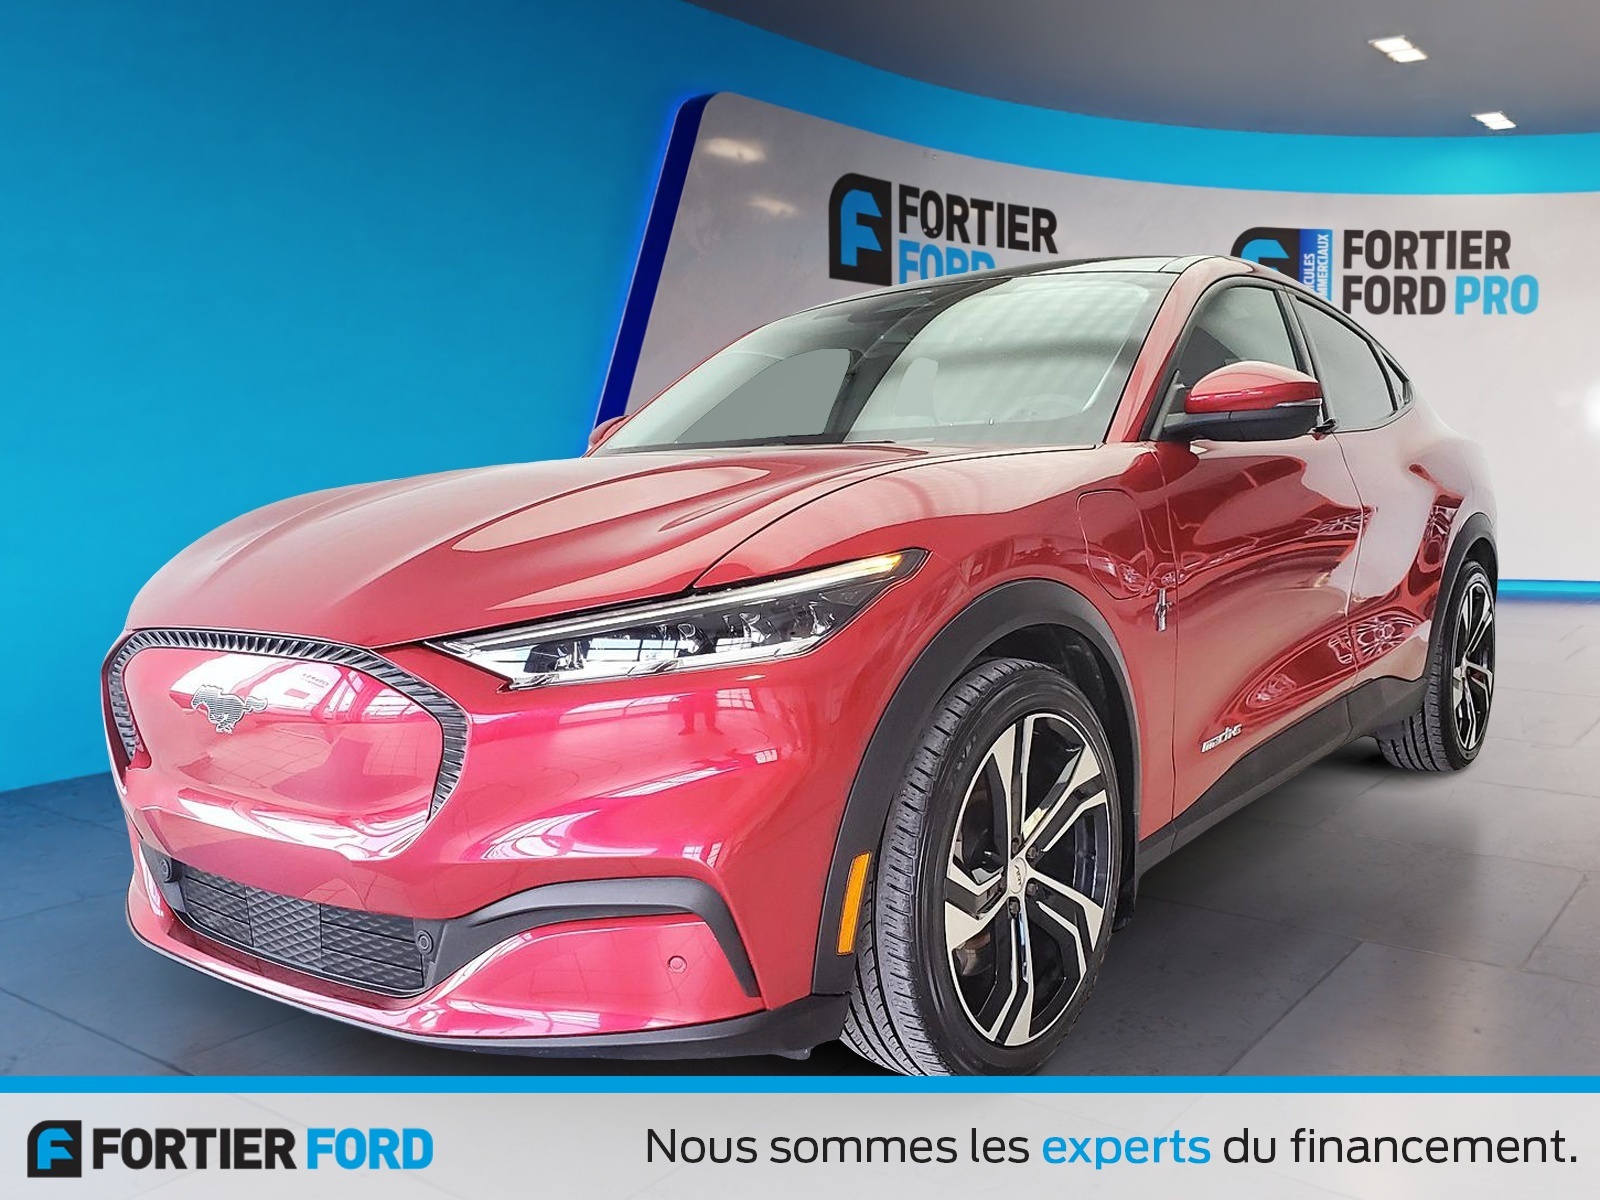 2021 Ford Mustang Mach-E SELECT ENS CONFORT DÉCOR + PROTECTION INTERIEUR